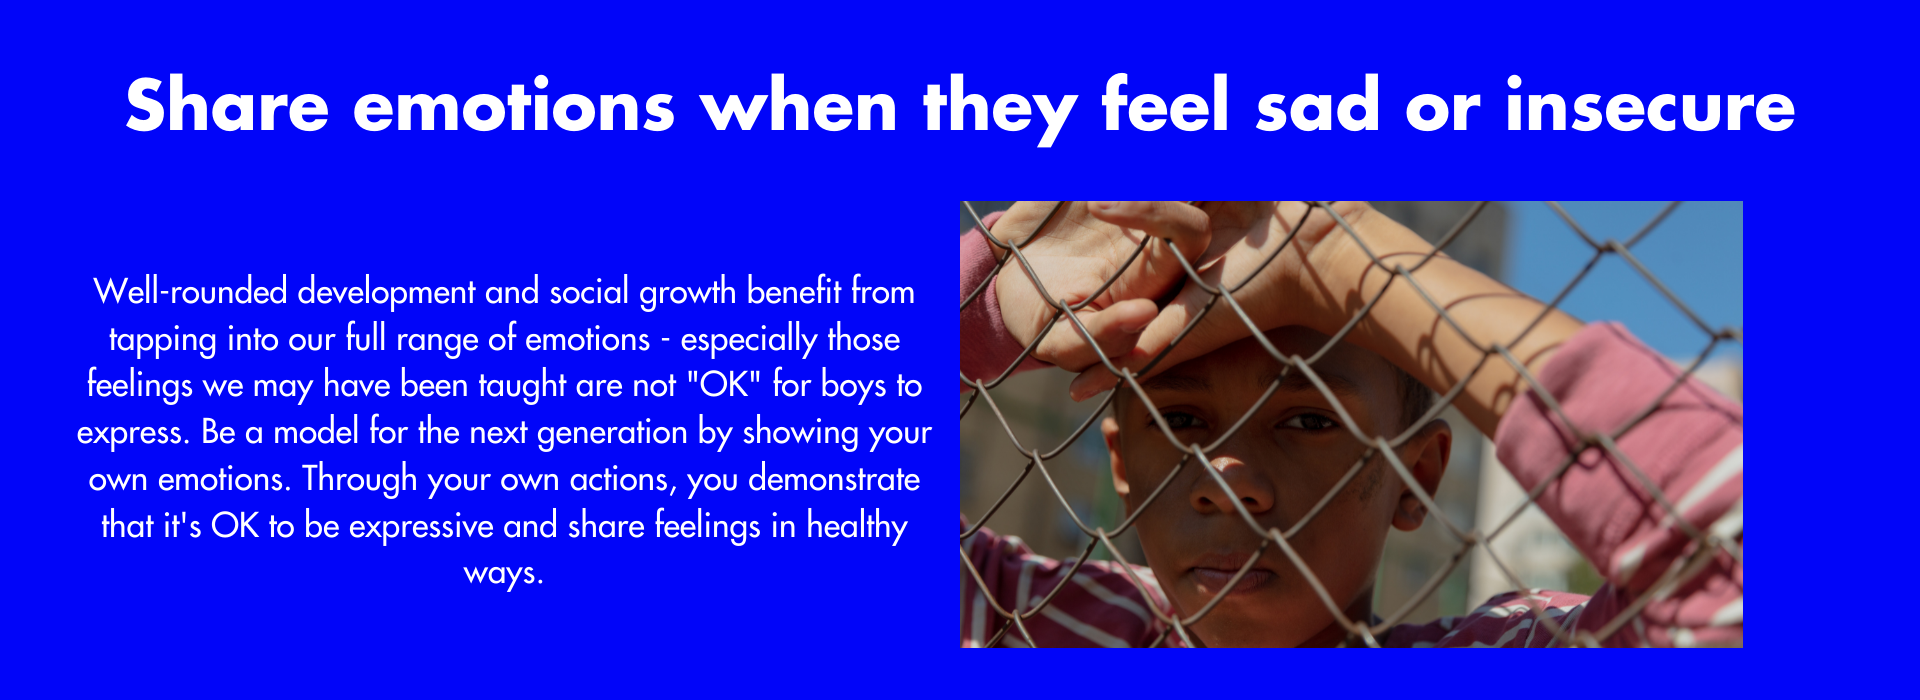 Share emotions when they feel sad or insecure